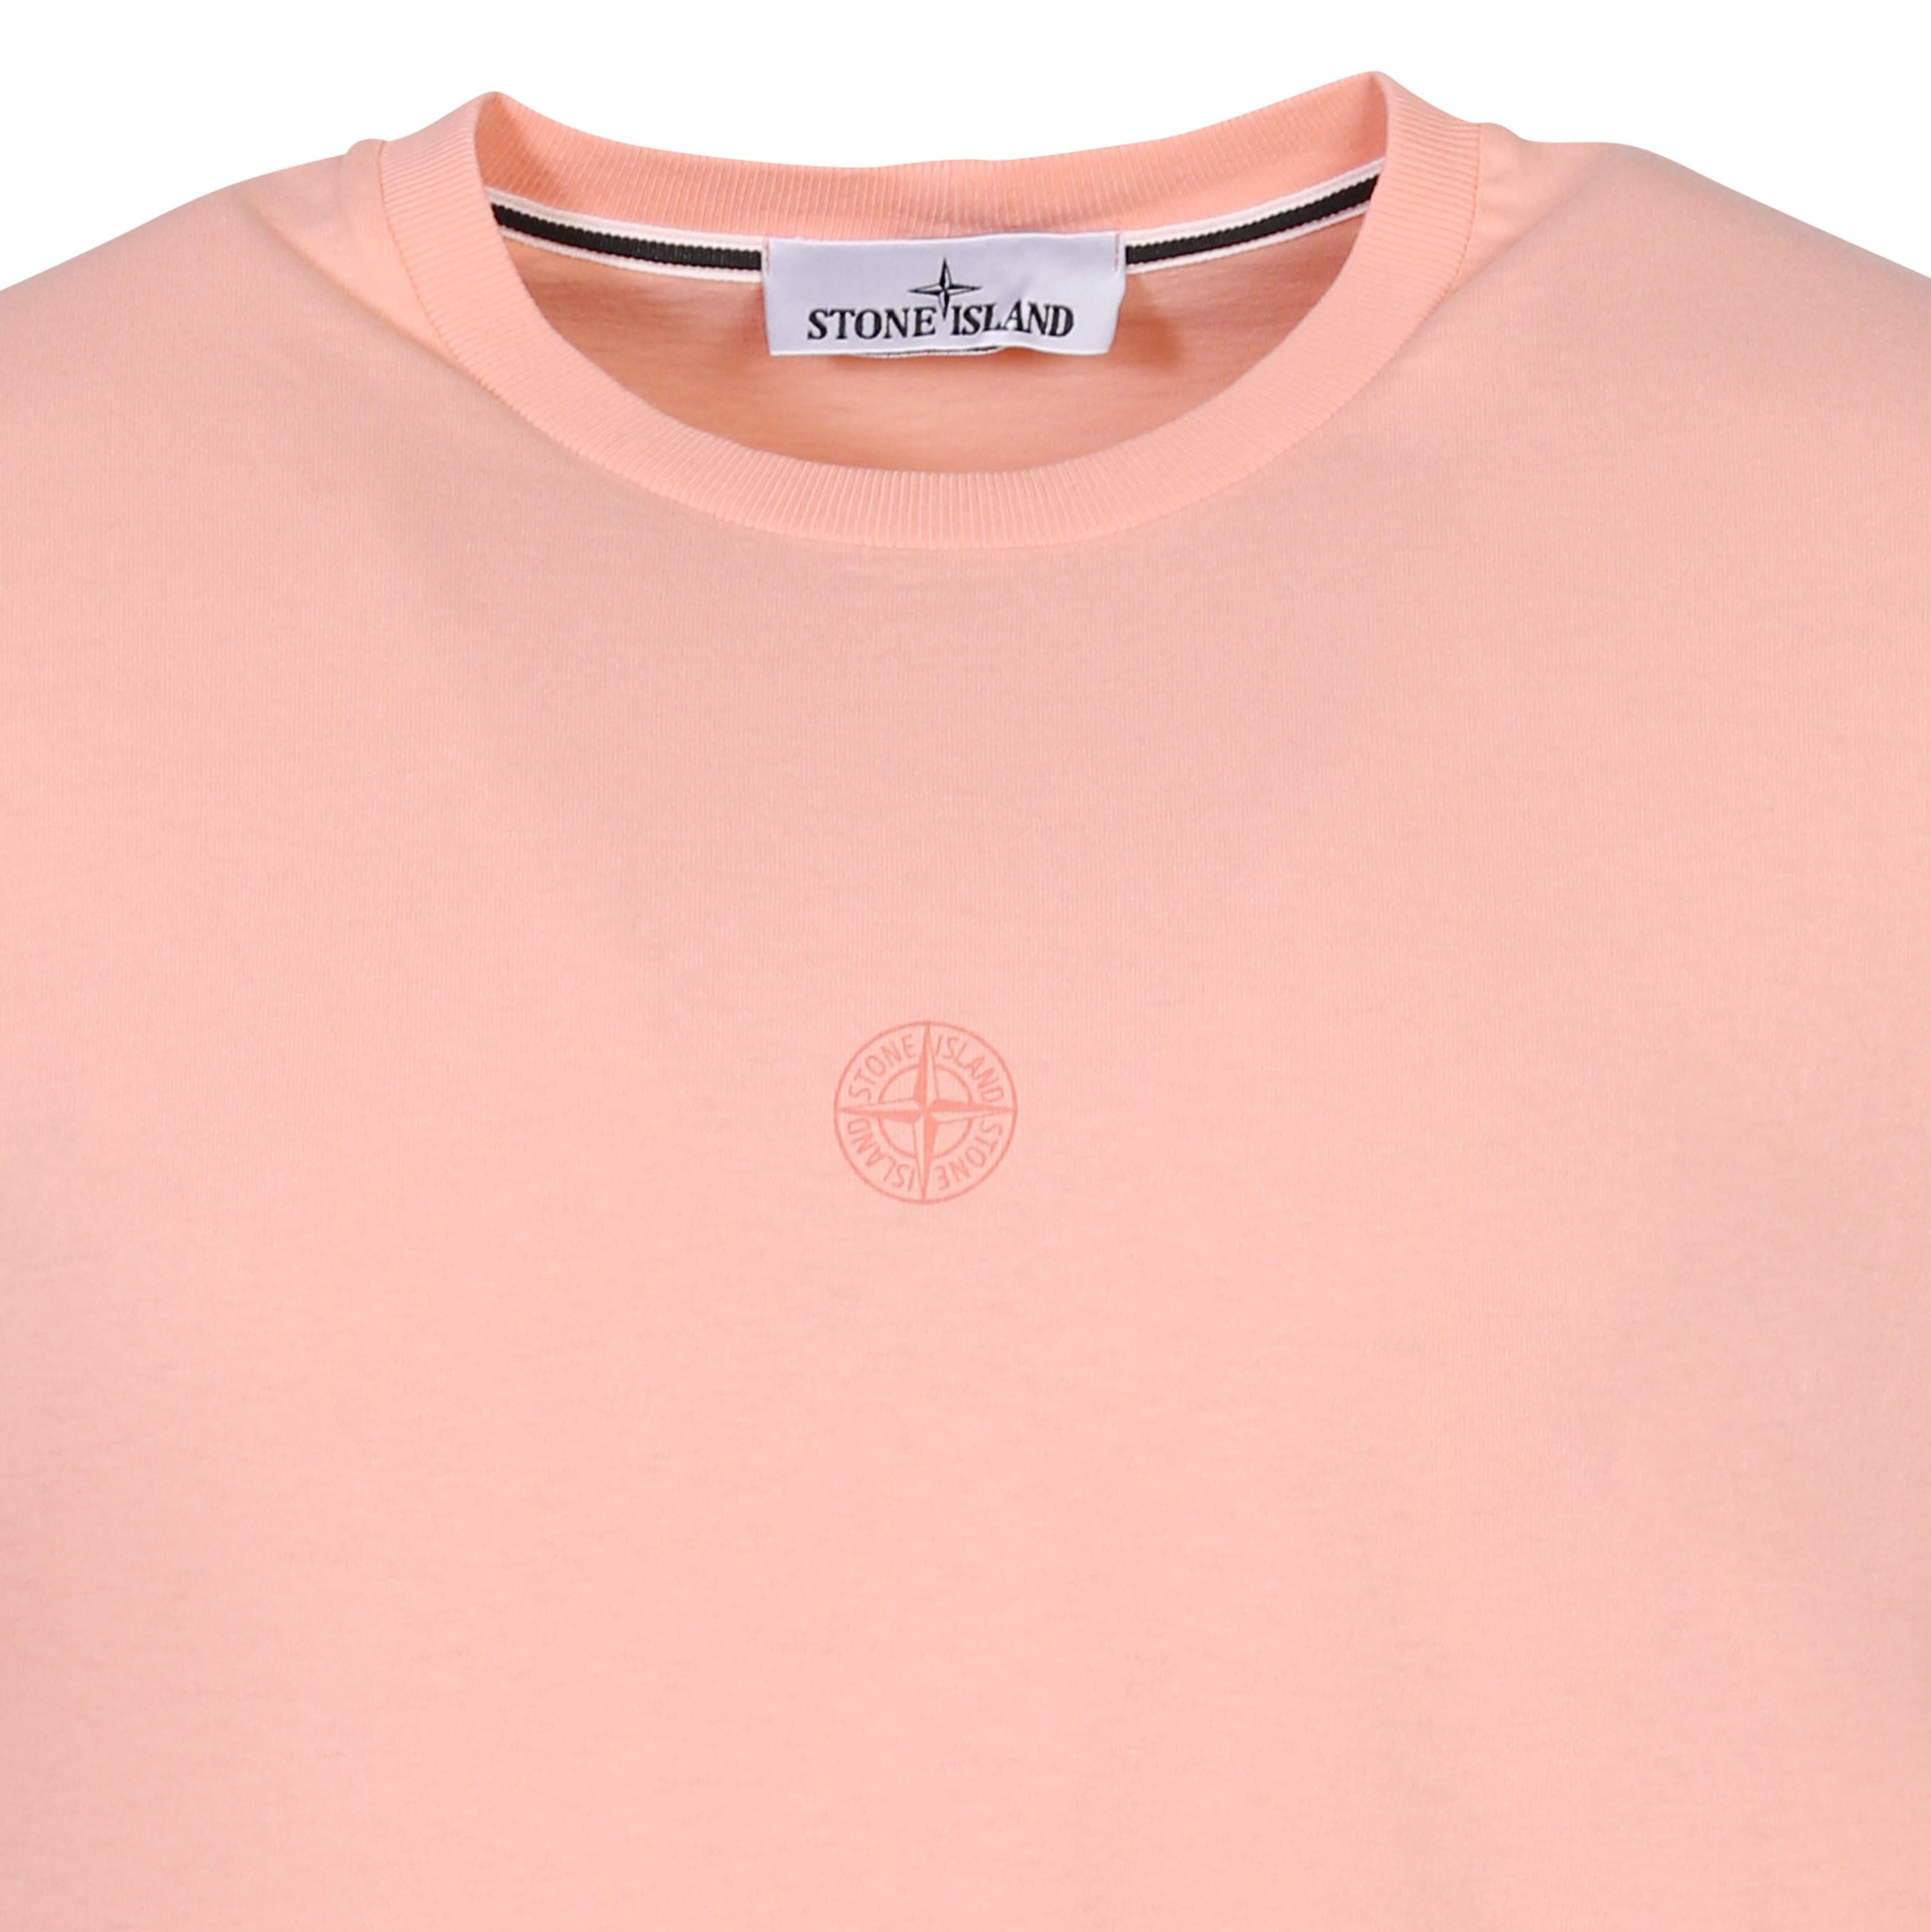 Stone Island Backprinted T-Shirt in Coral S